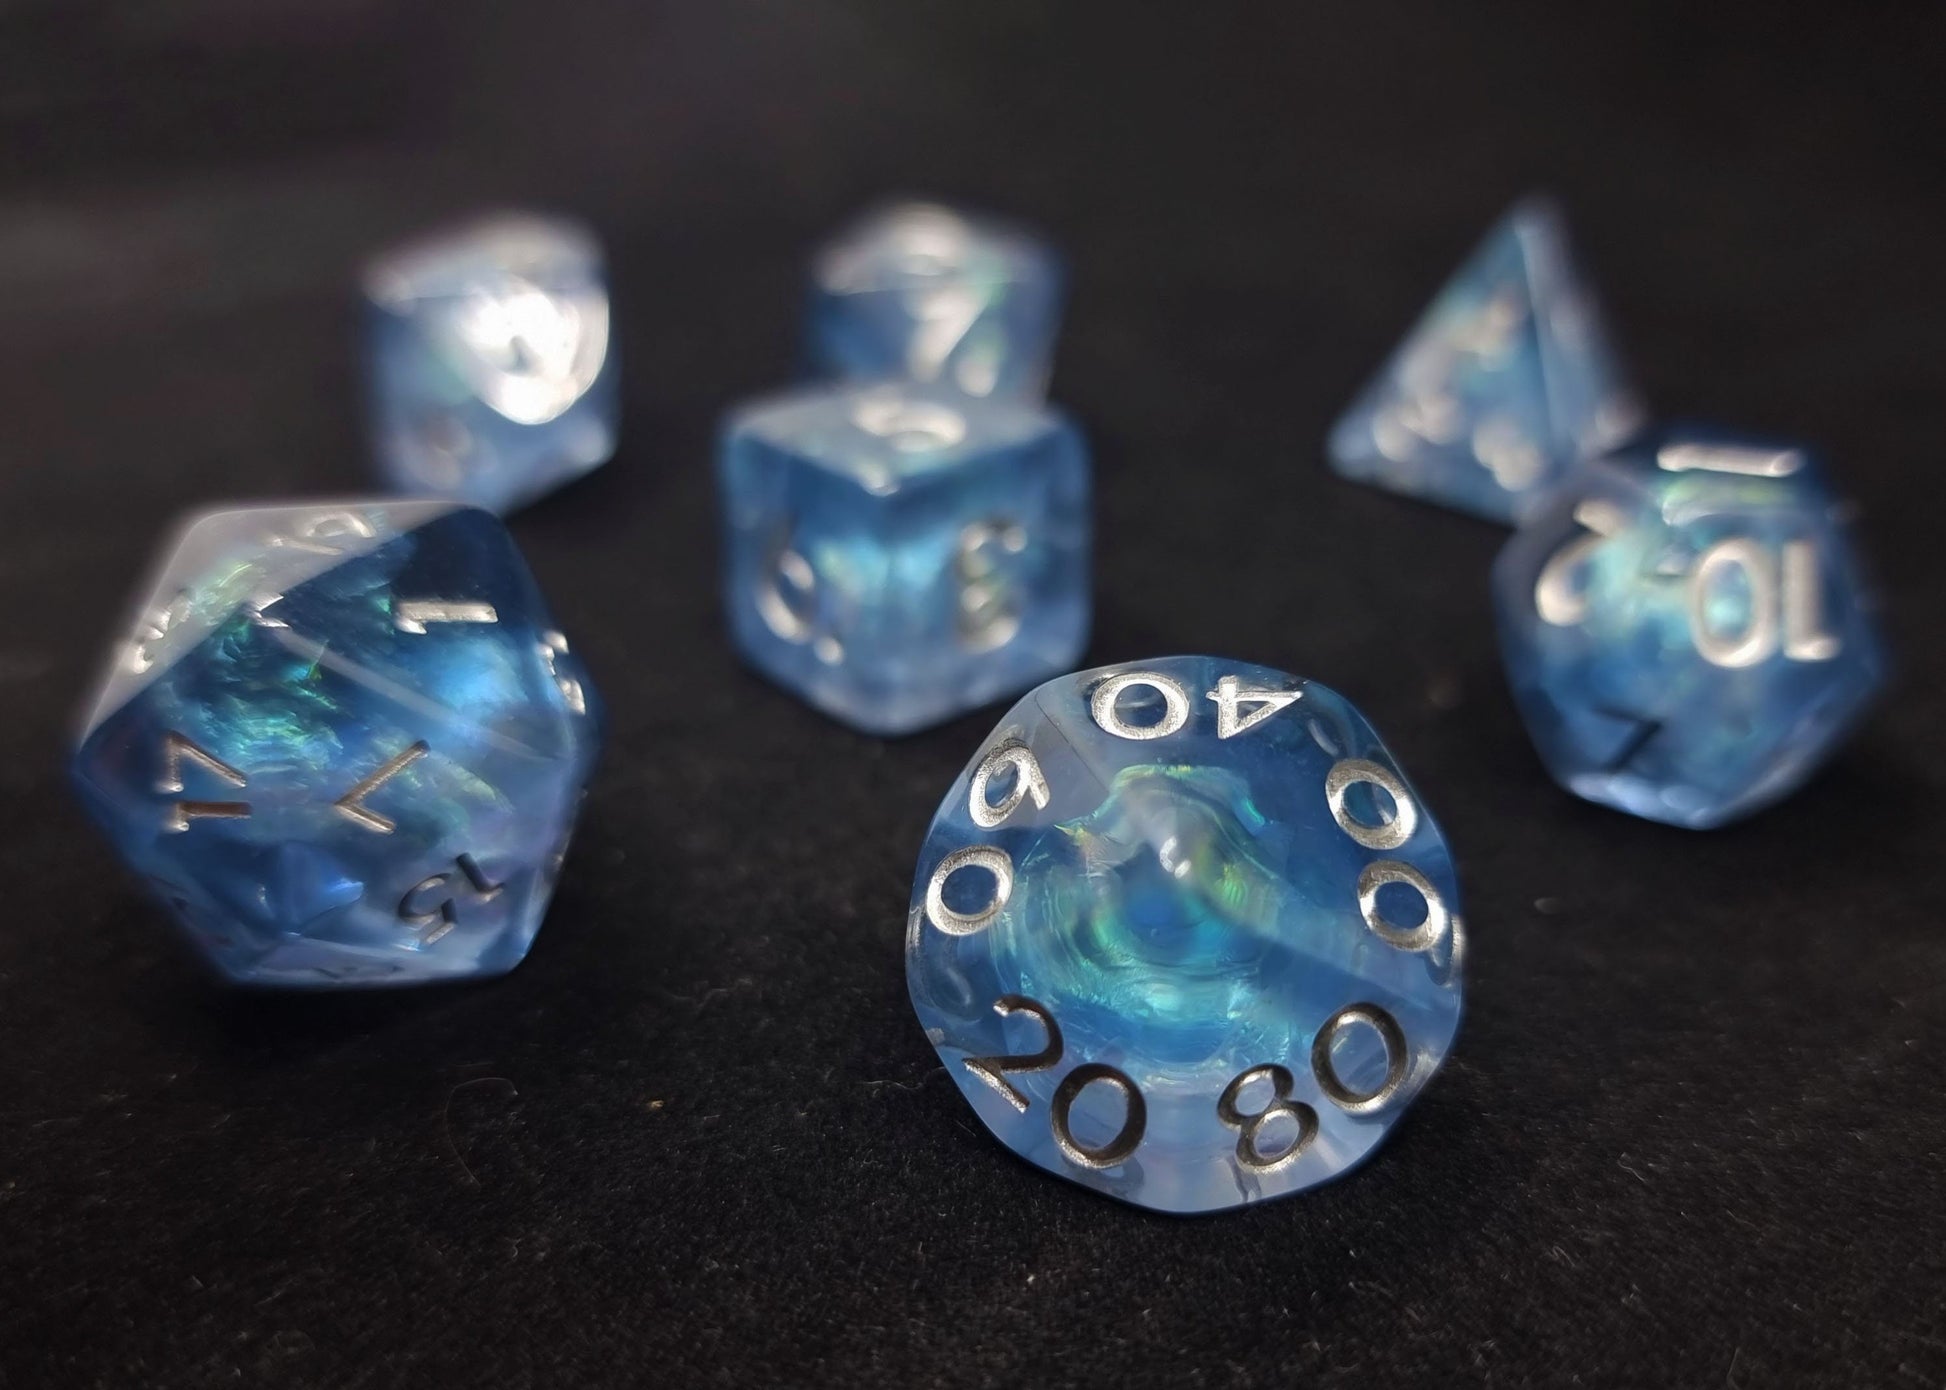 Glacial Ice Polyhedral Dice Set - Translucent Blue Grey with Iridescent Foil Core